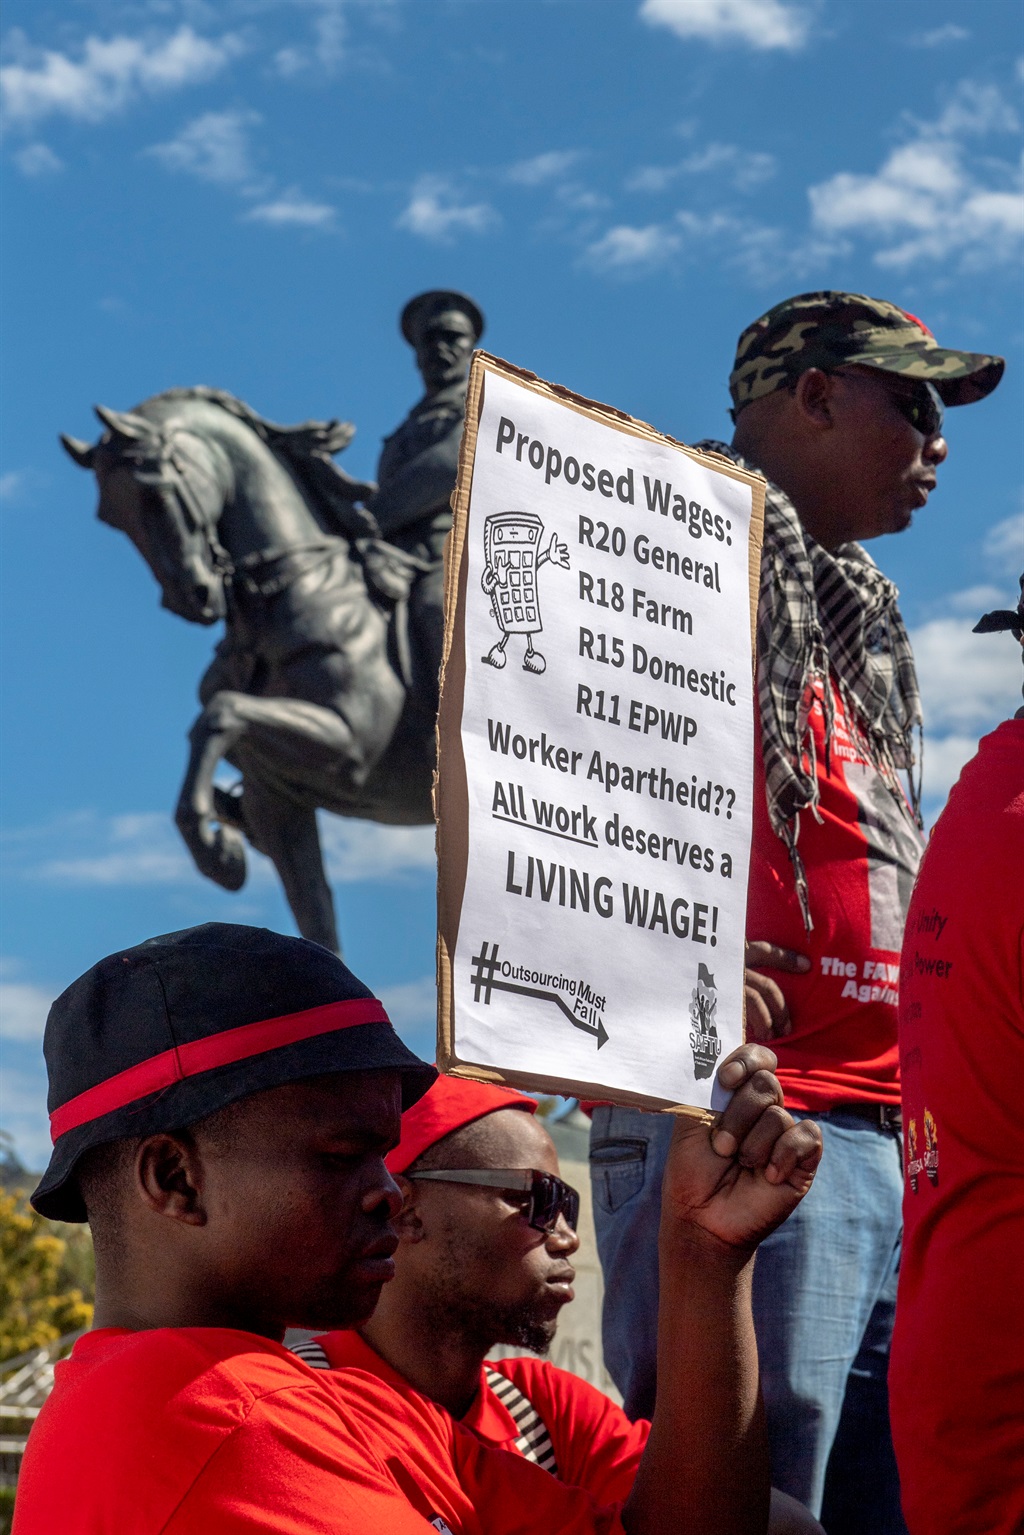 Saftu rejects the proposed minimum wage of R20 an hour for general workers. PHOTO: Jaco Marais